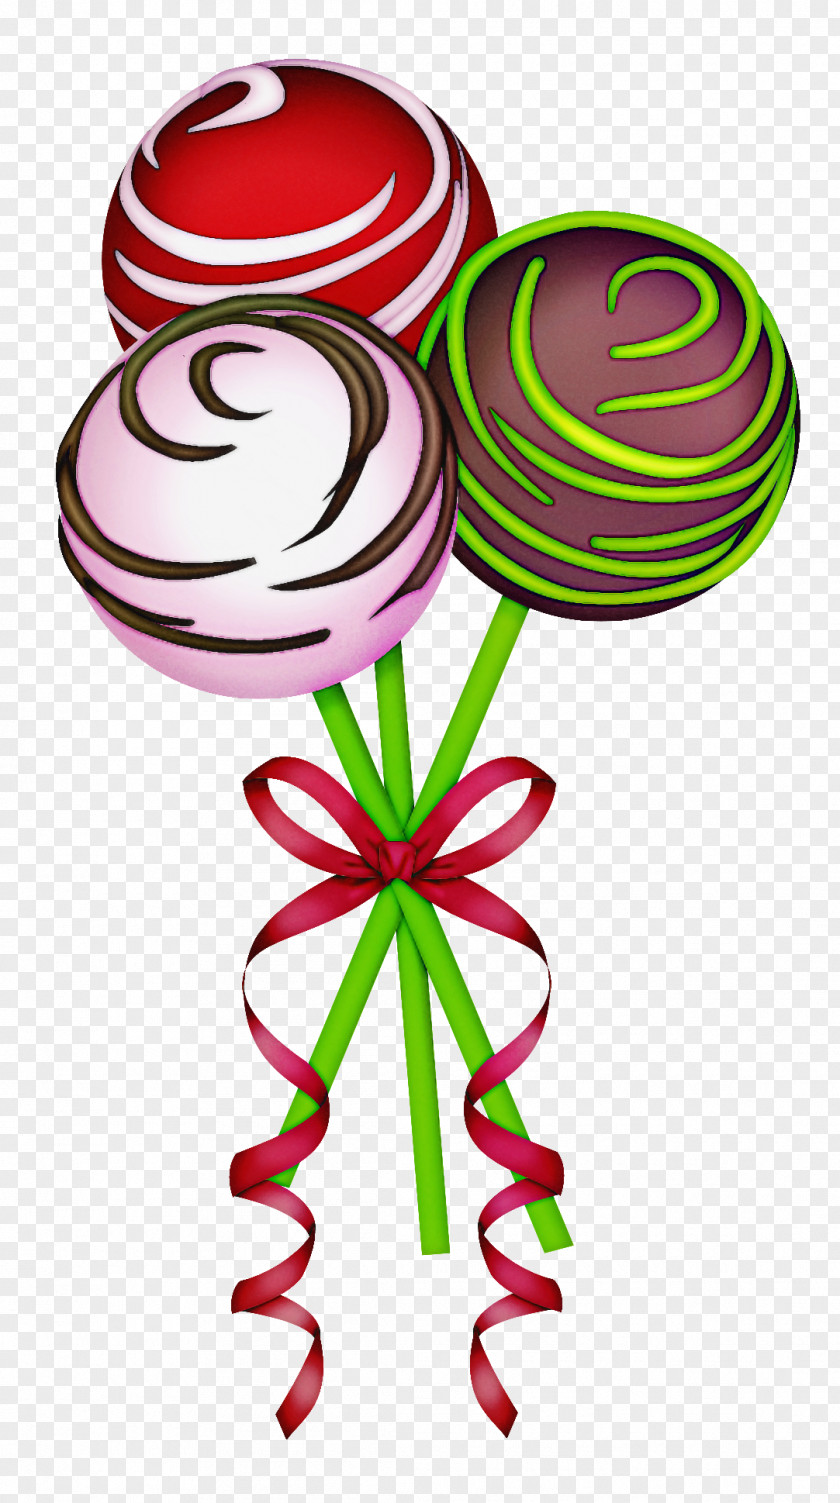 Lollipop Stick Candy Confectionery PNG